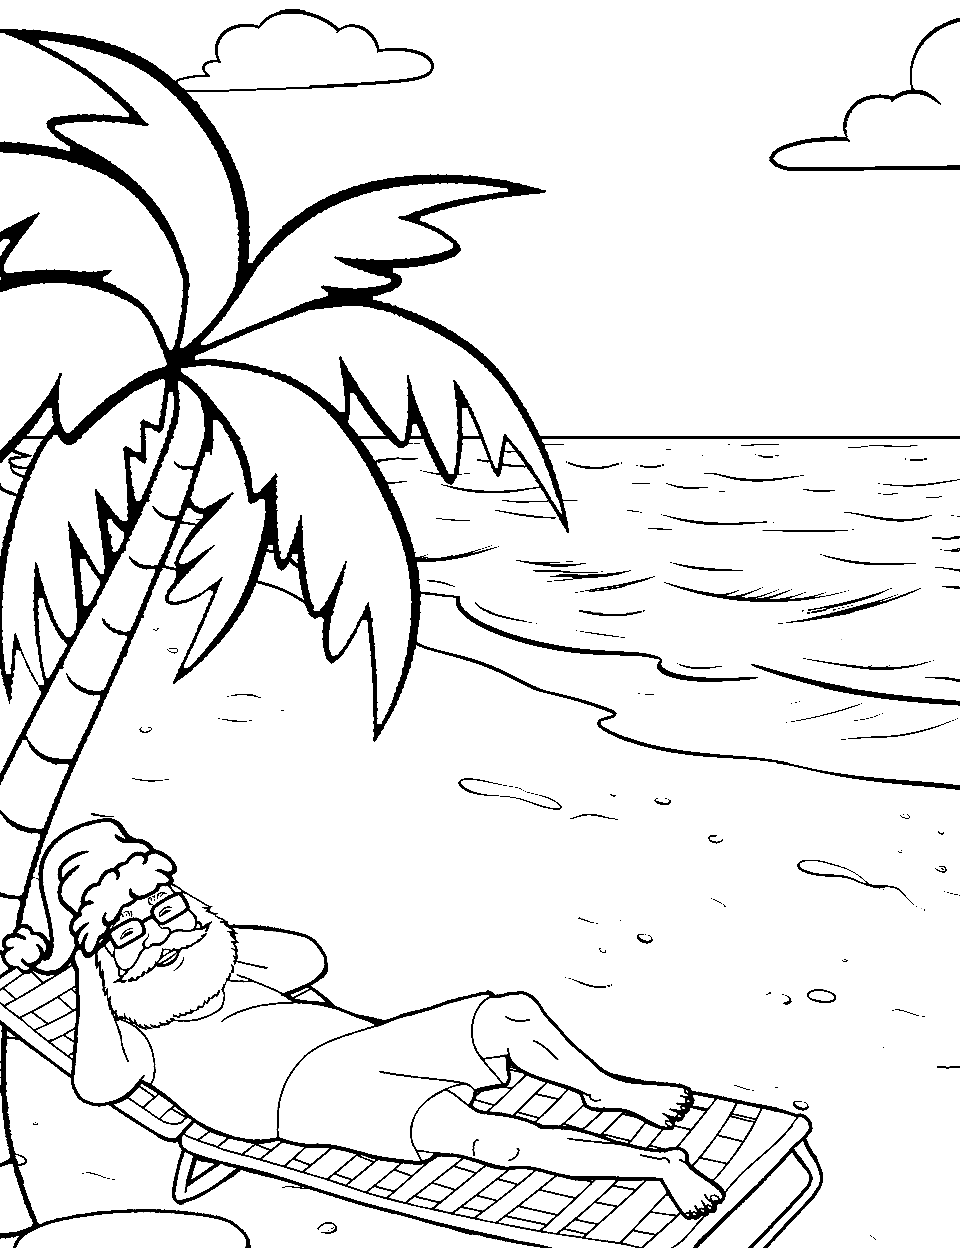 Santa Relaxing on a Beach Coloring Page - Santa in summer attire, relaxing on a sandy beach with a palm tree.